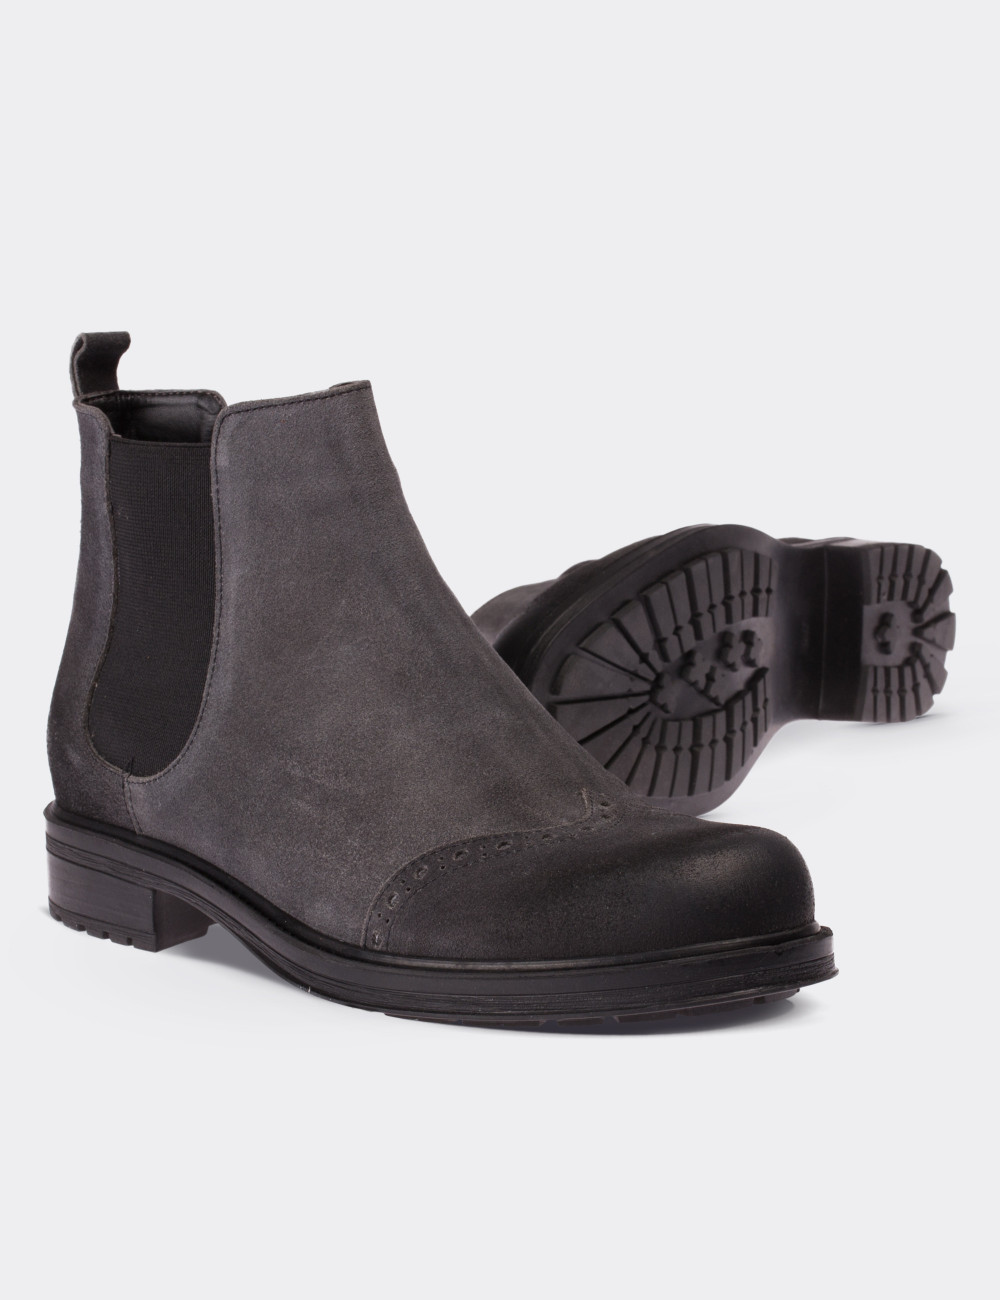 Gray Suede Leather Chelsea Boots - 01572ZGRIC01